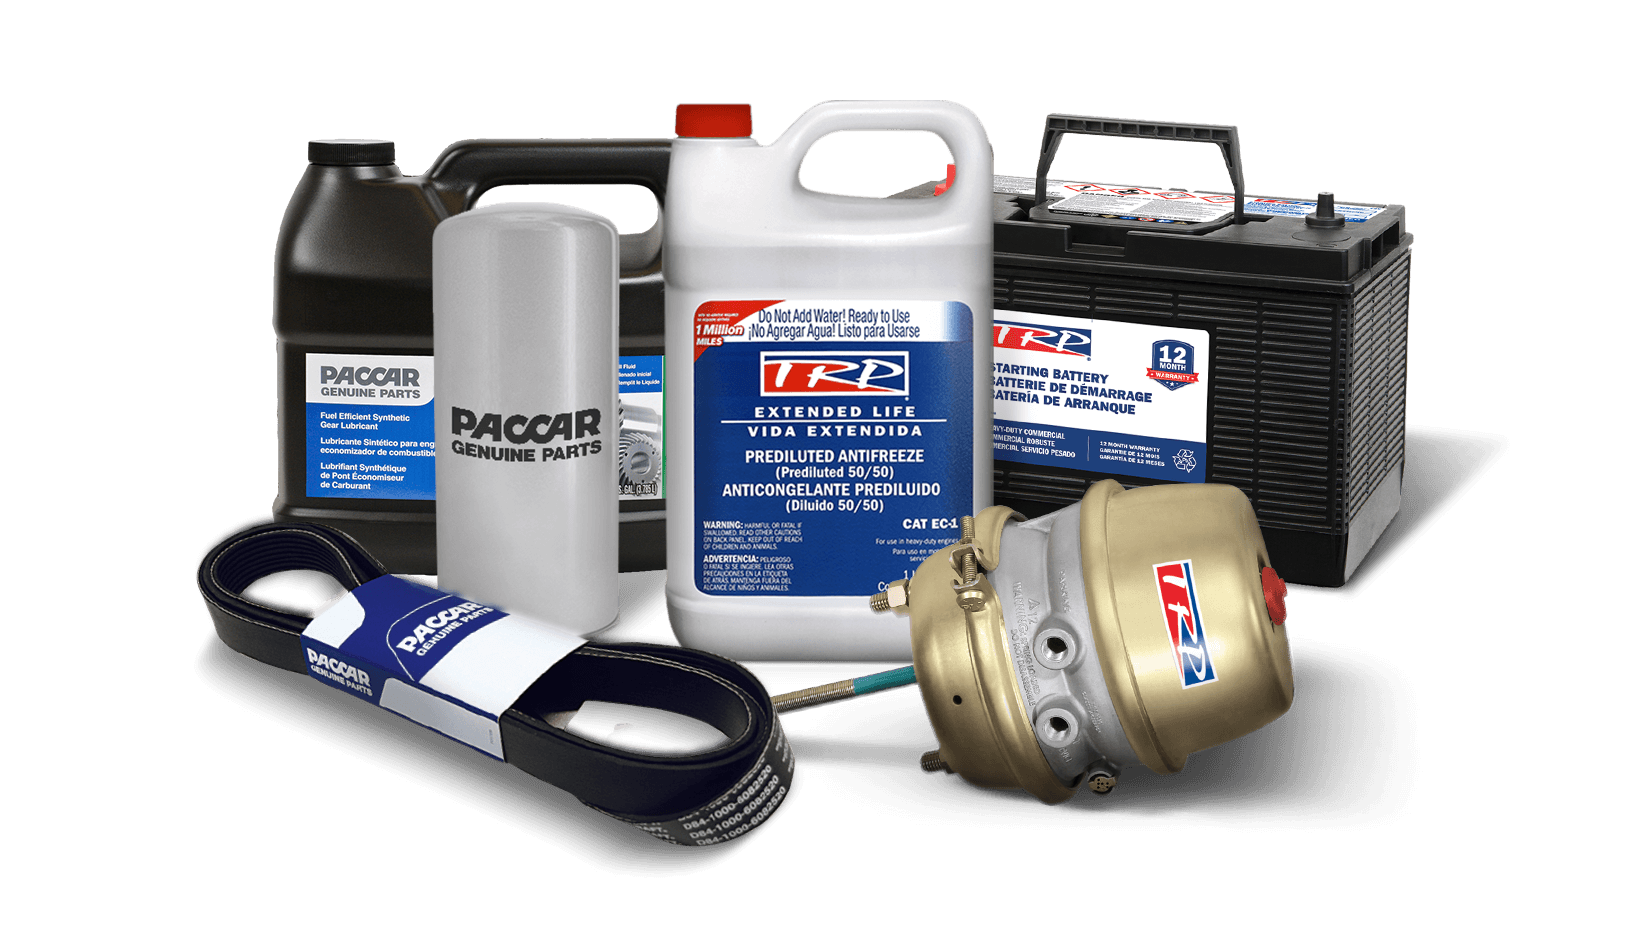 __Collection of PACCAR products